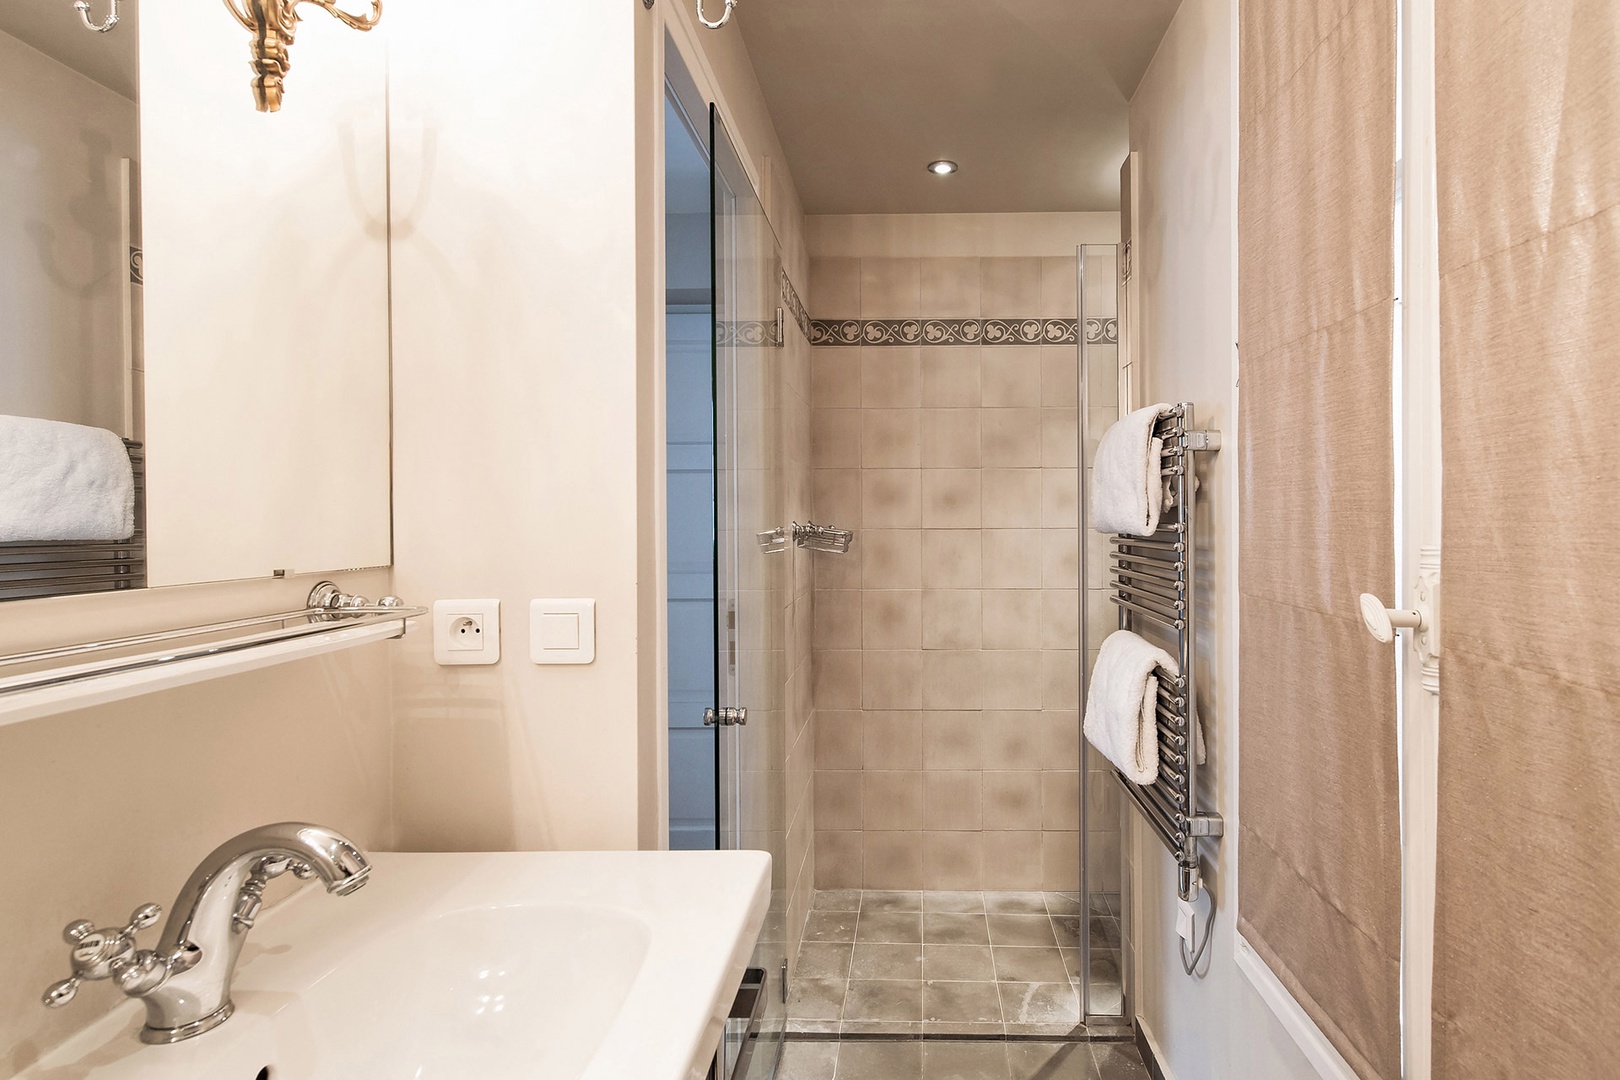 Start your day with an energizing shower in this modern bathroom!